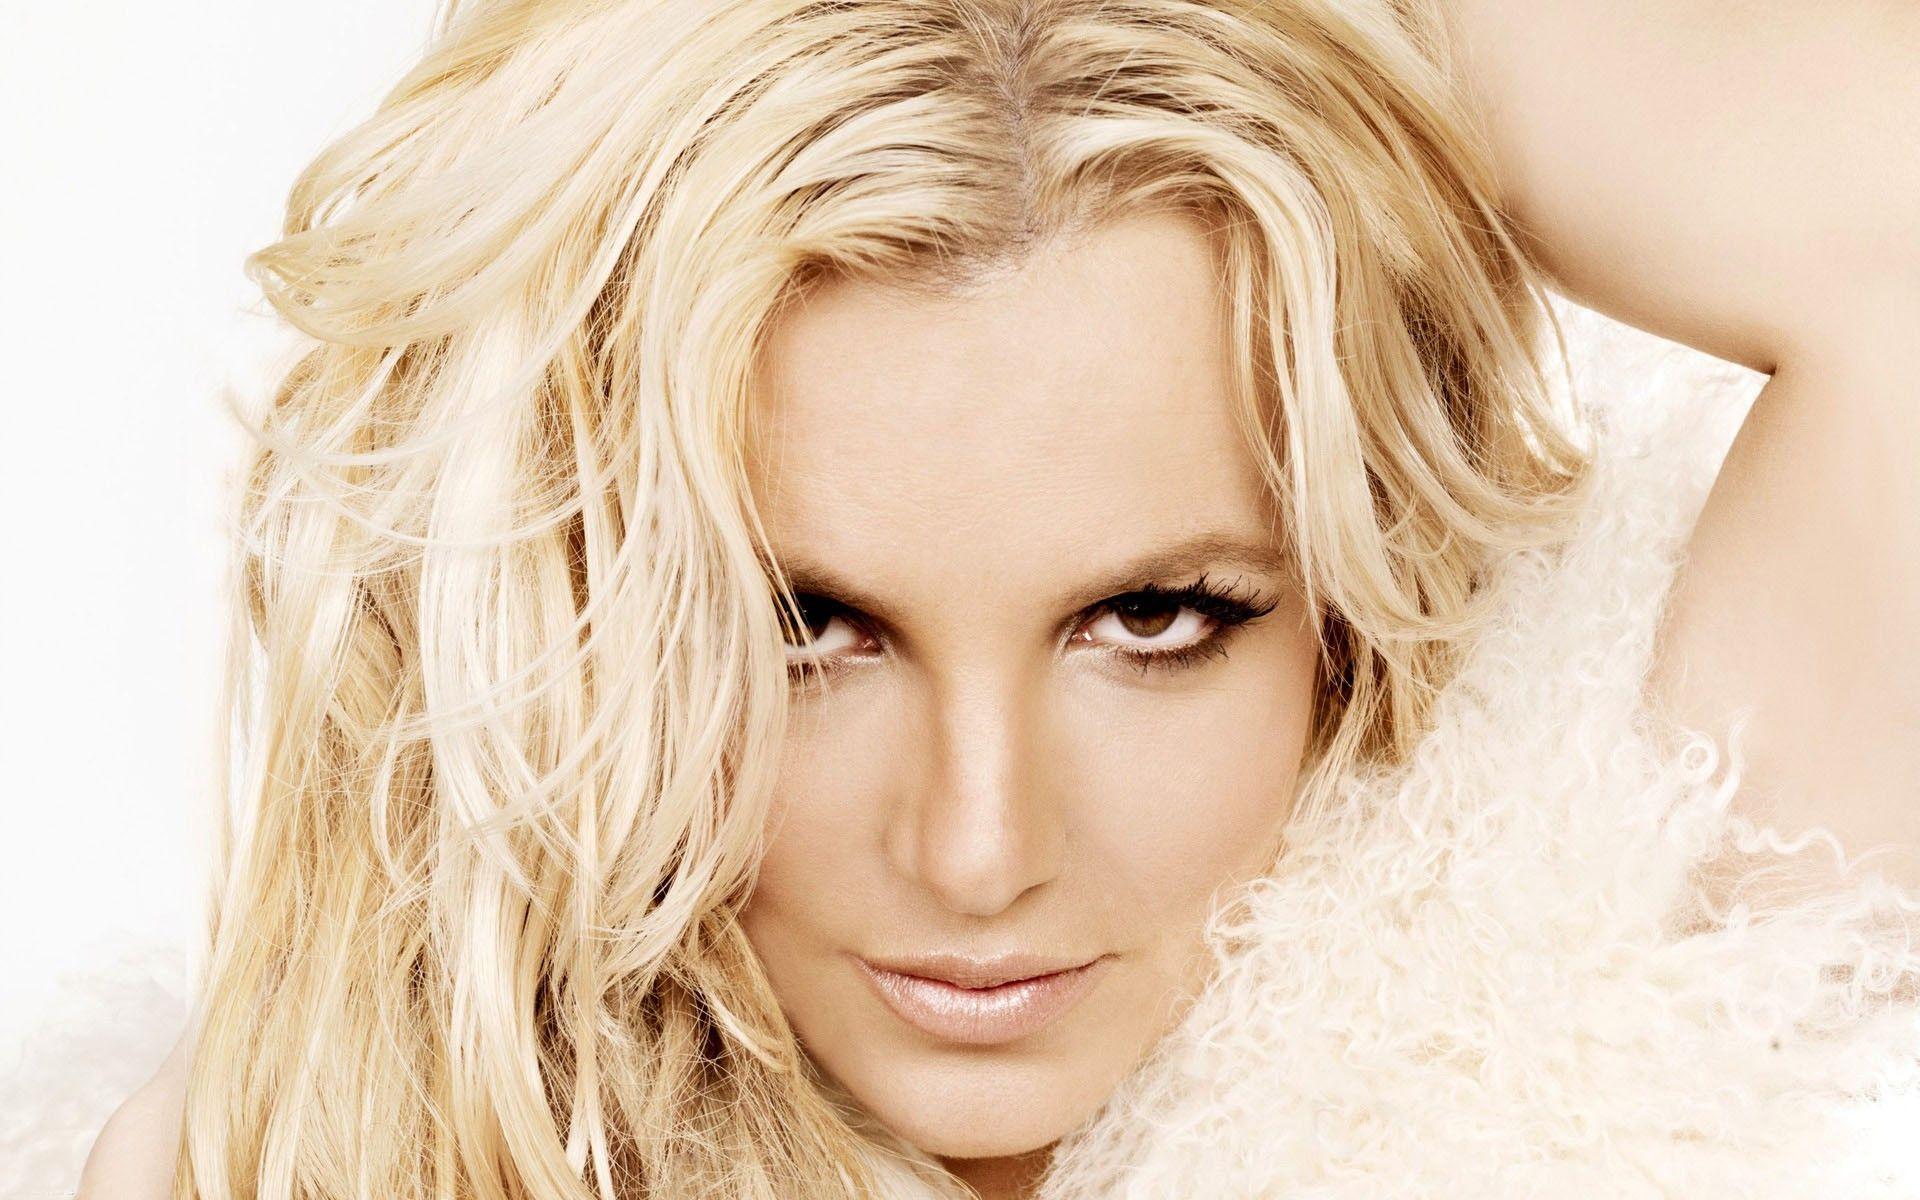 Britney Spears Wallpaper High Resolution and Quality Download